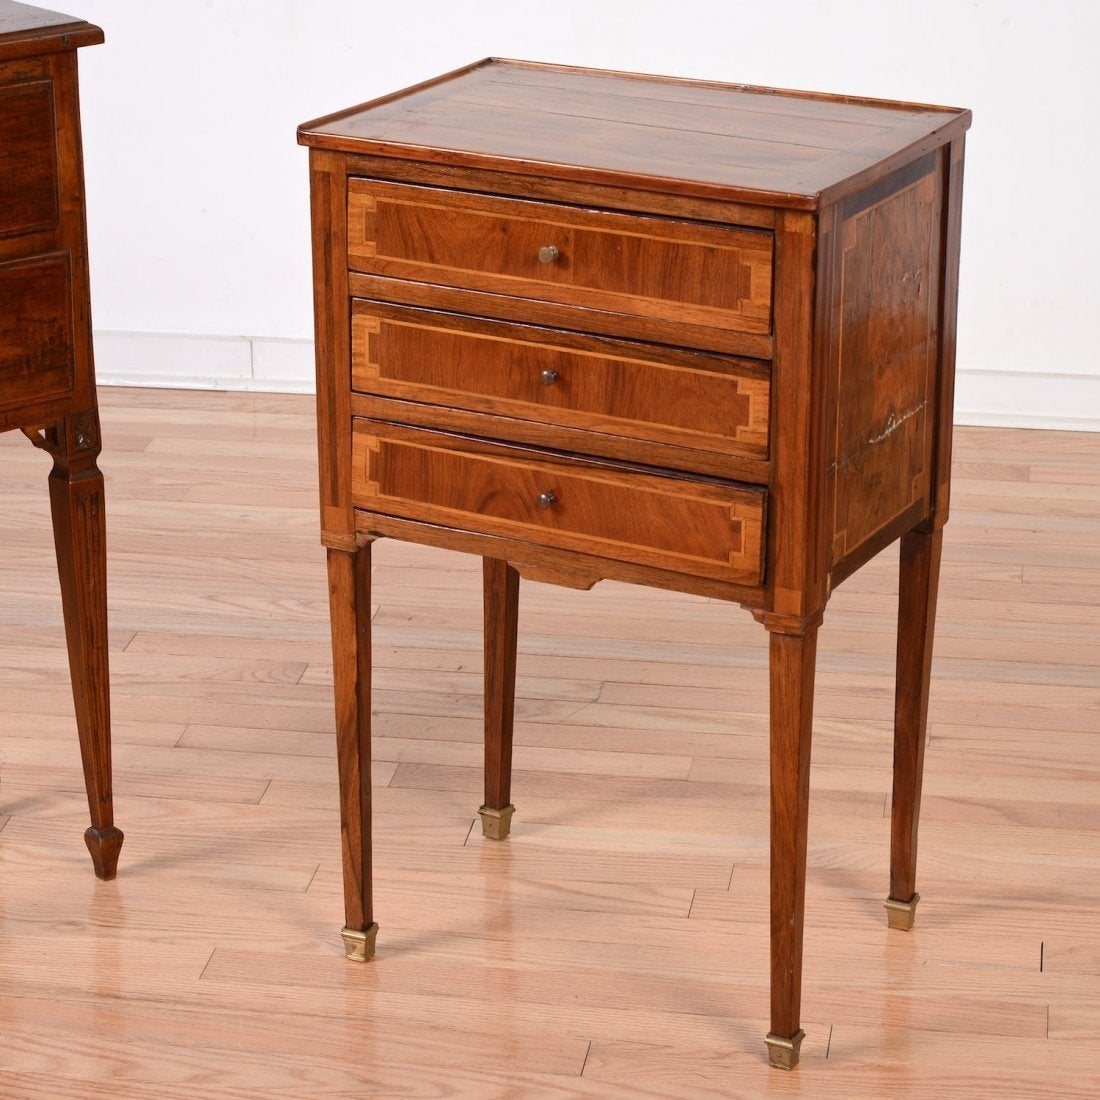 Italian Neoclassical Carved Inlaid Walnut Side Table with Three Drawers, 18th Century